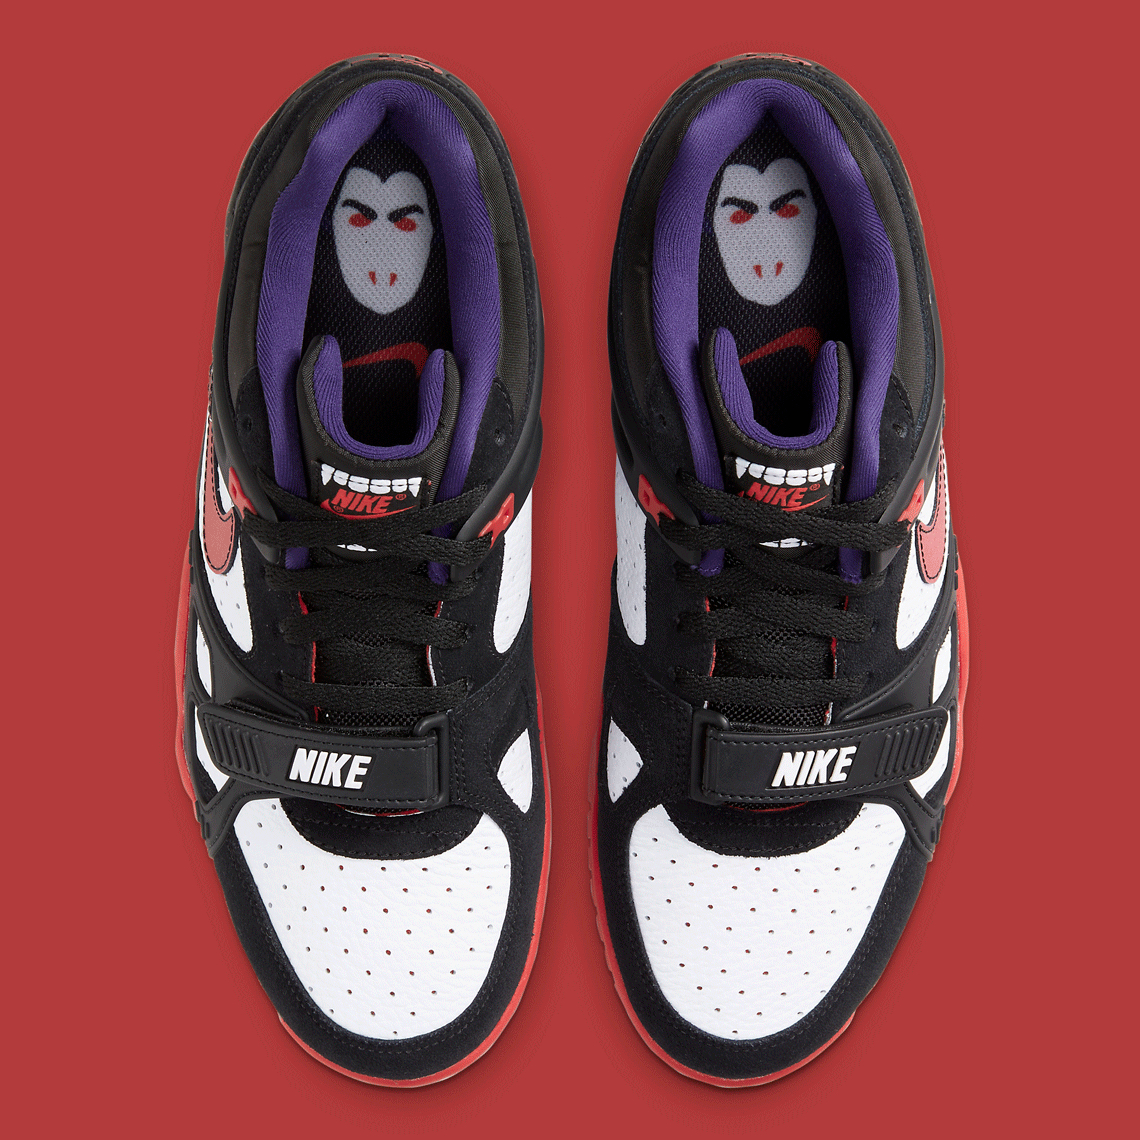 Nike Forefoot Air Conditioner Dracula Halloween Dc1501 001 Sneakernews Com - 𝐎𝐑𝐈𝐆𝐈𝐍𝐀𝐋 fire ice nike roblox